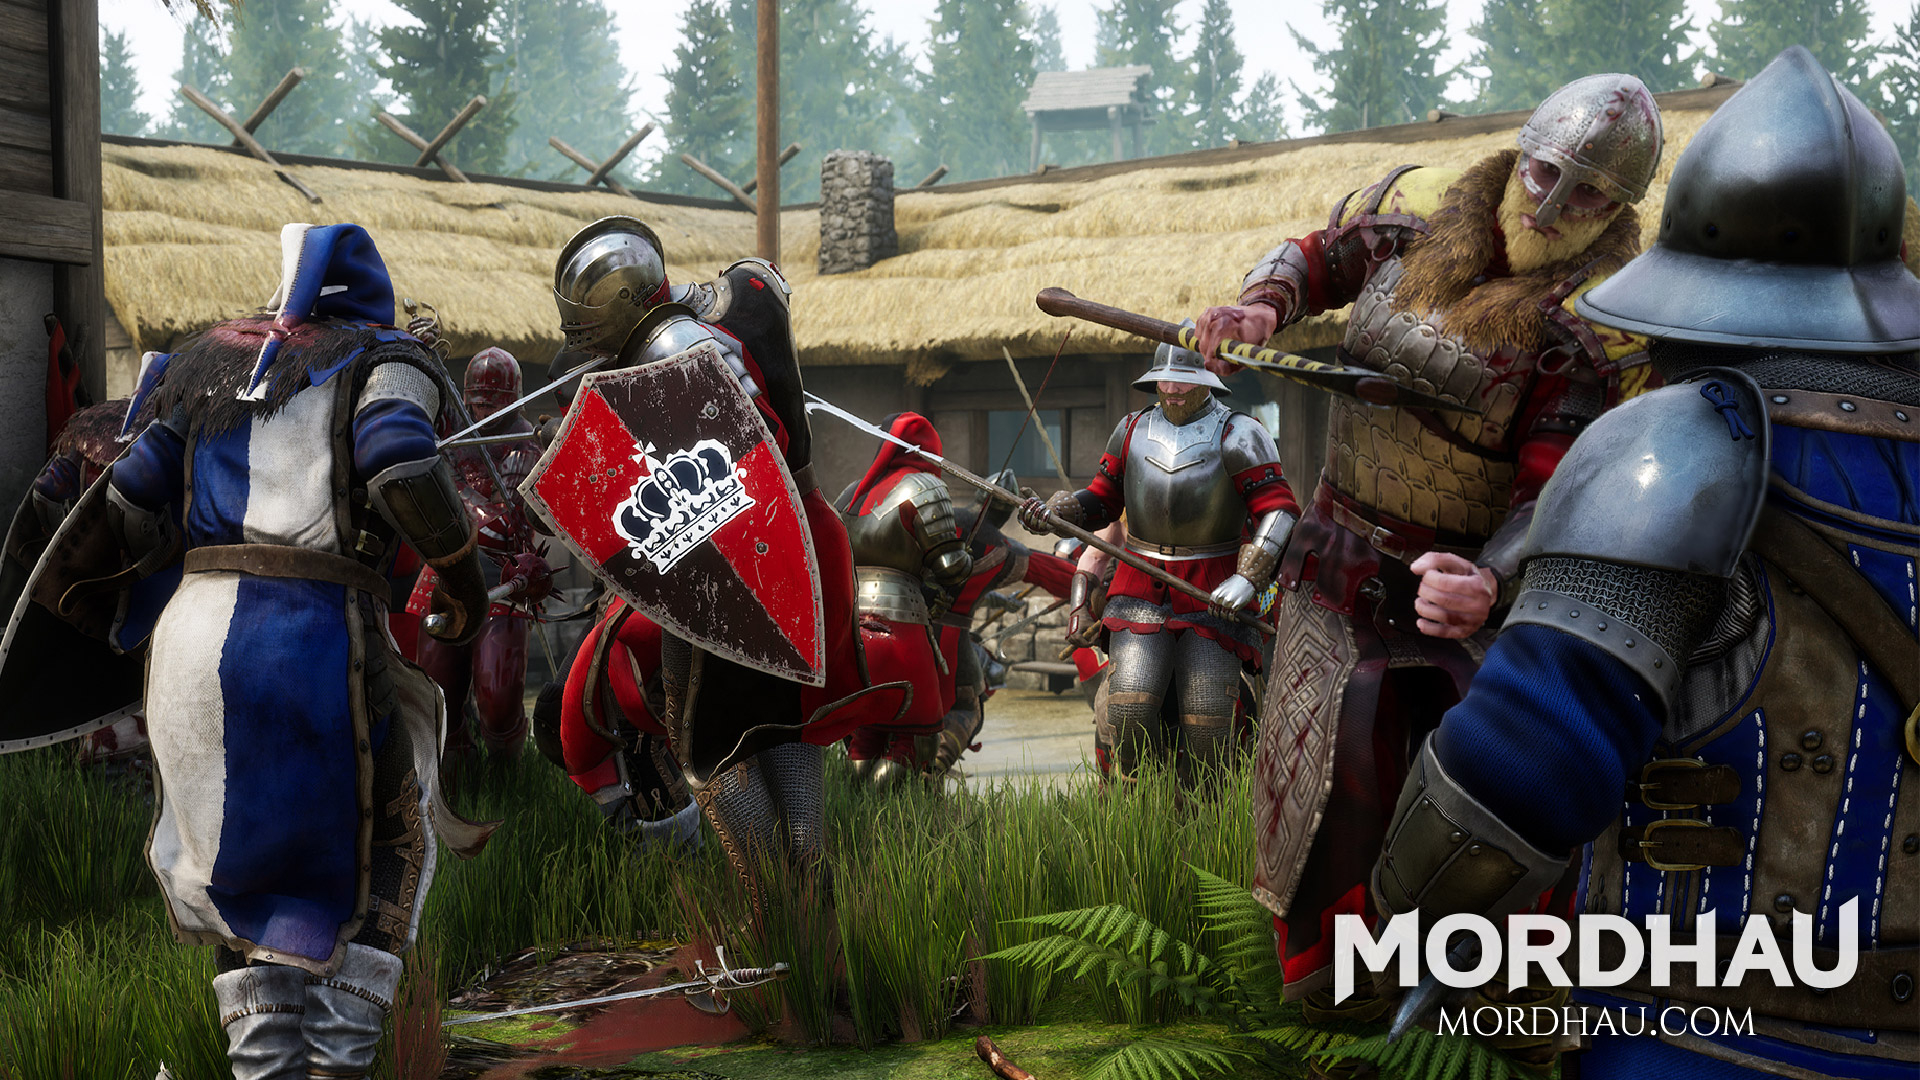 The Developers Behind Medieval Hack ‘N Slash Game Mordhau Hope To Get Over Racism, Sexism Controversy